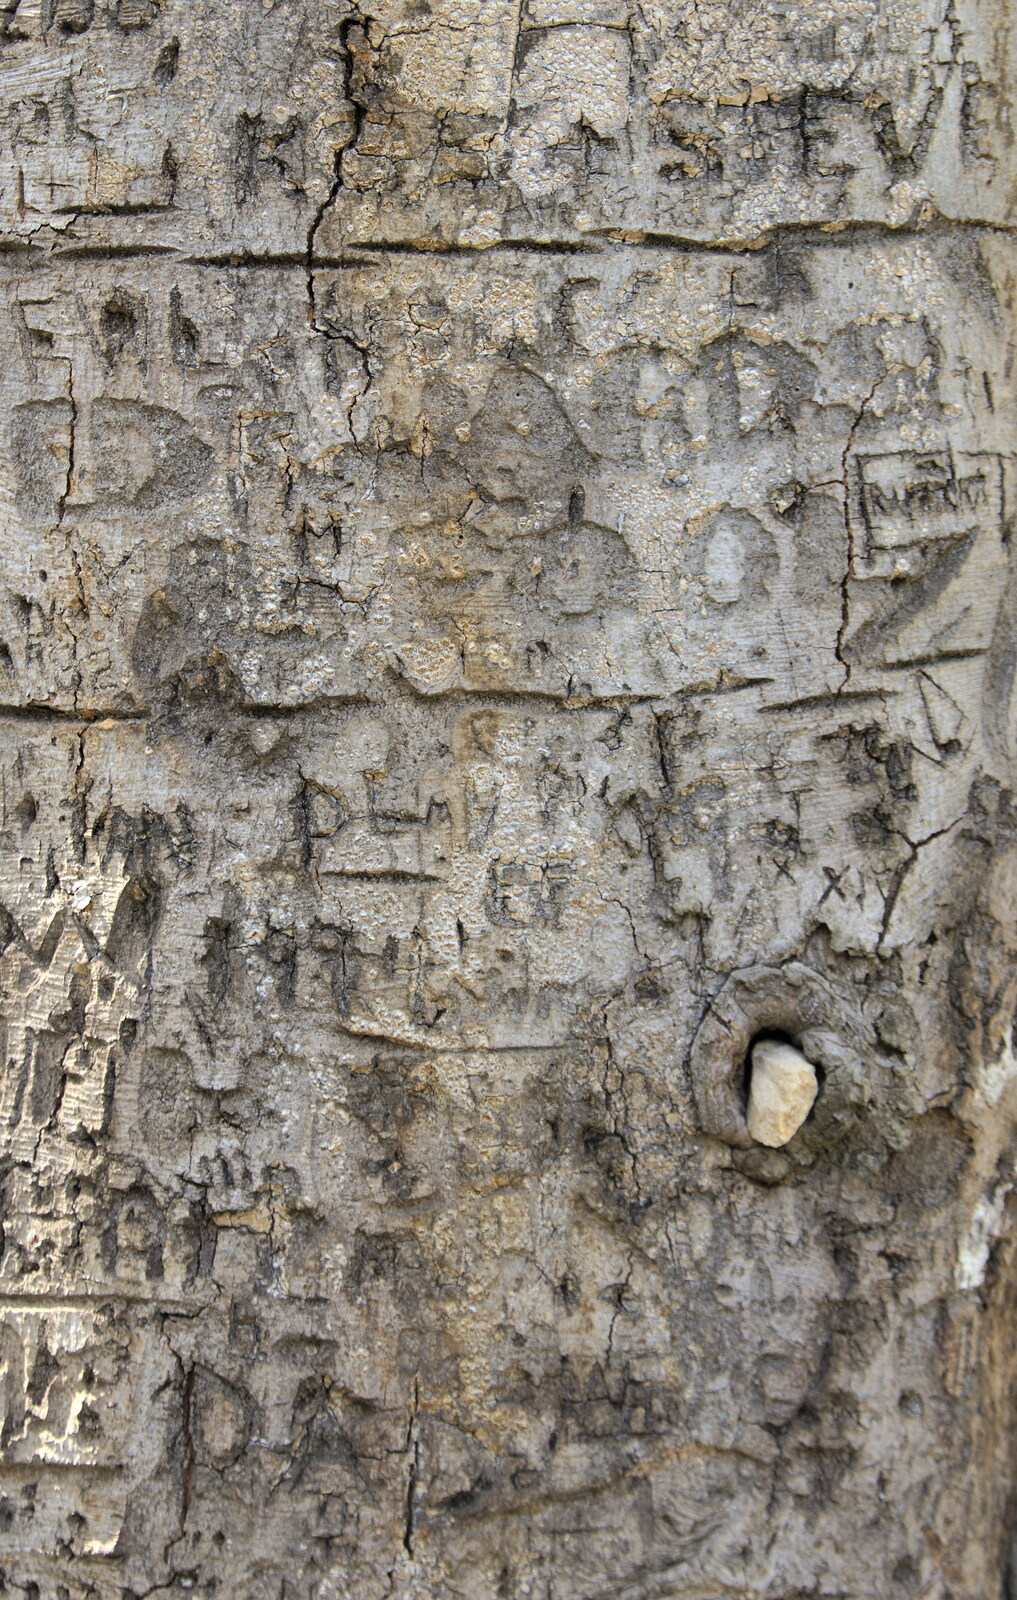 Graffiti in bark from Camping at Dower House, West Harling, Norfolk - 1st July 2017